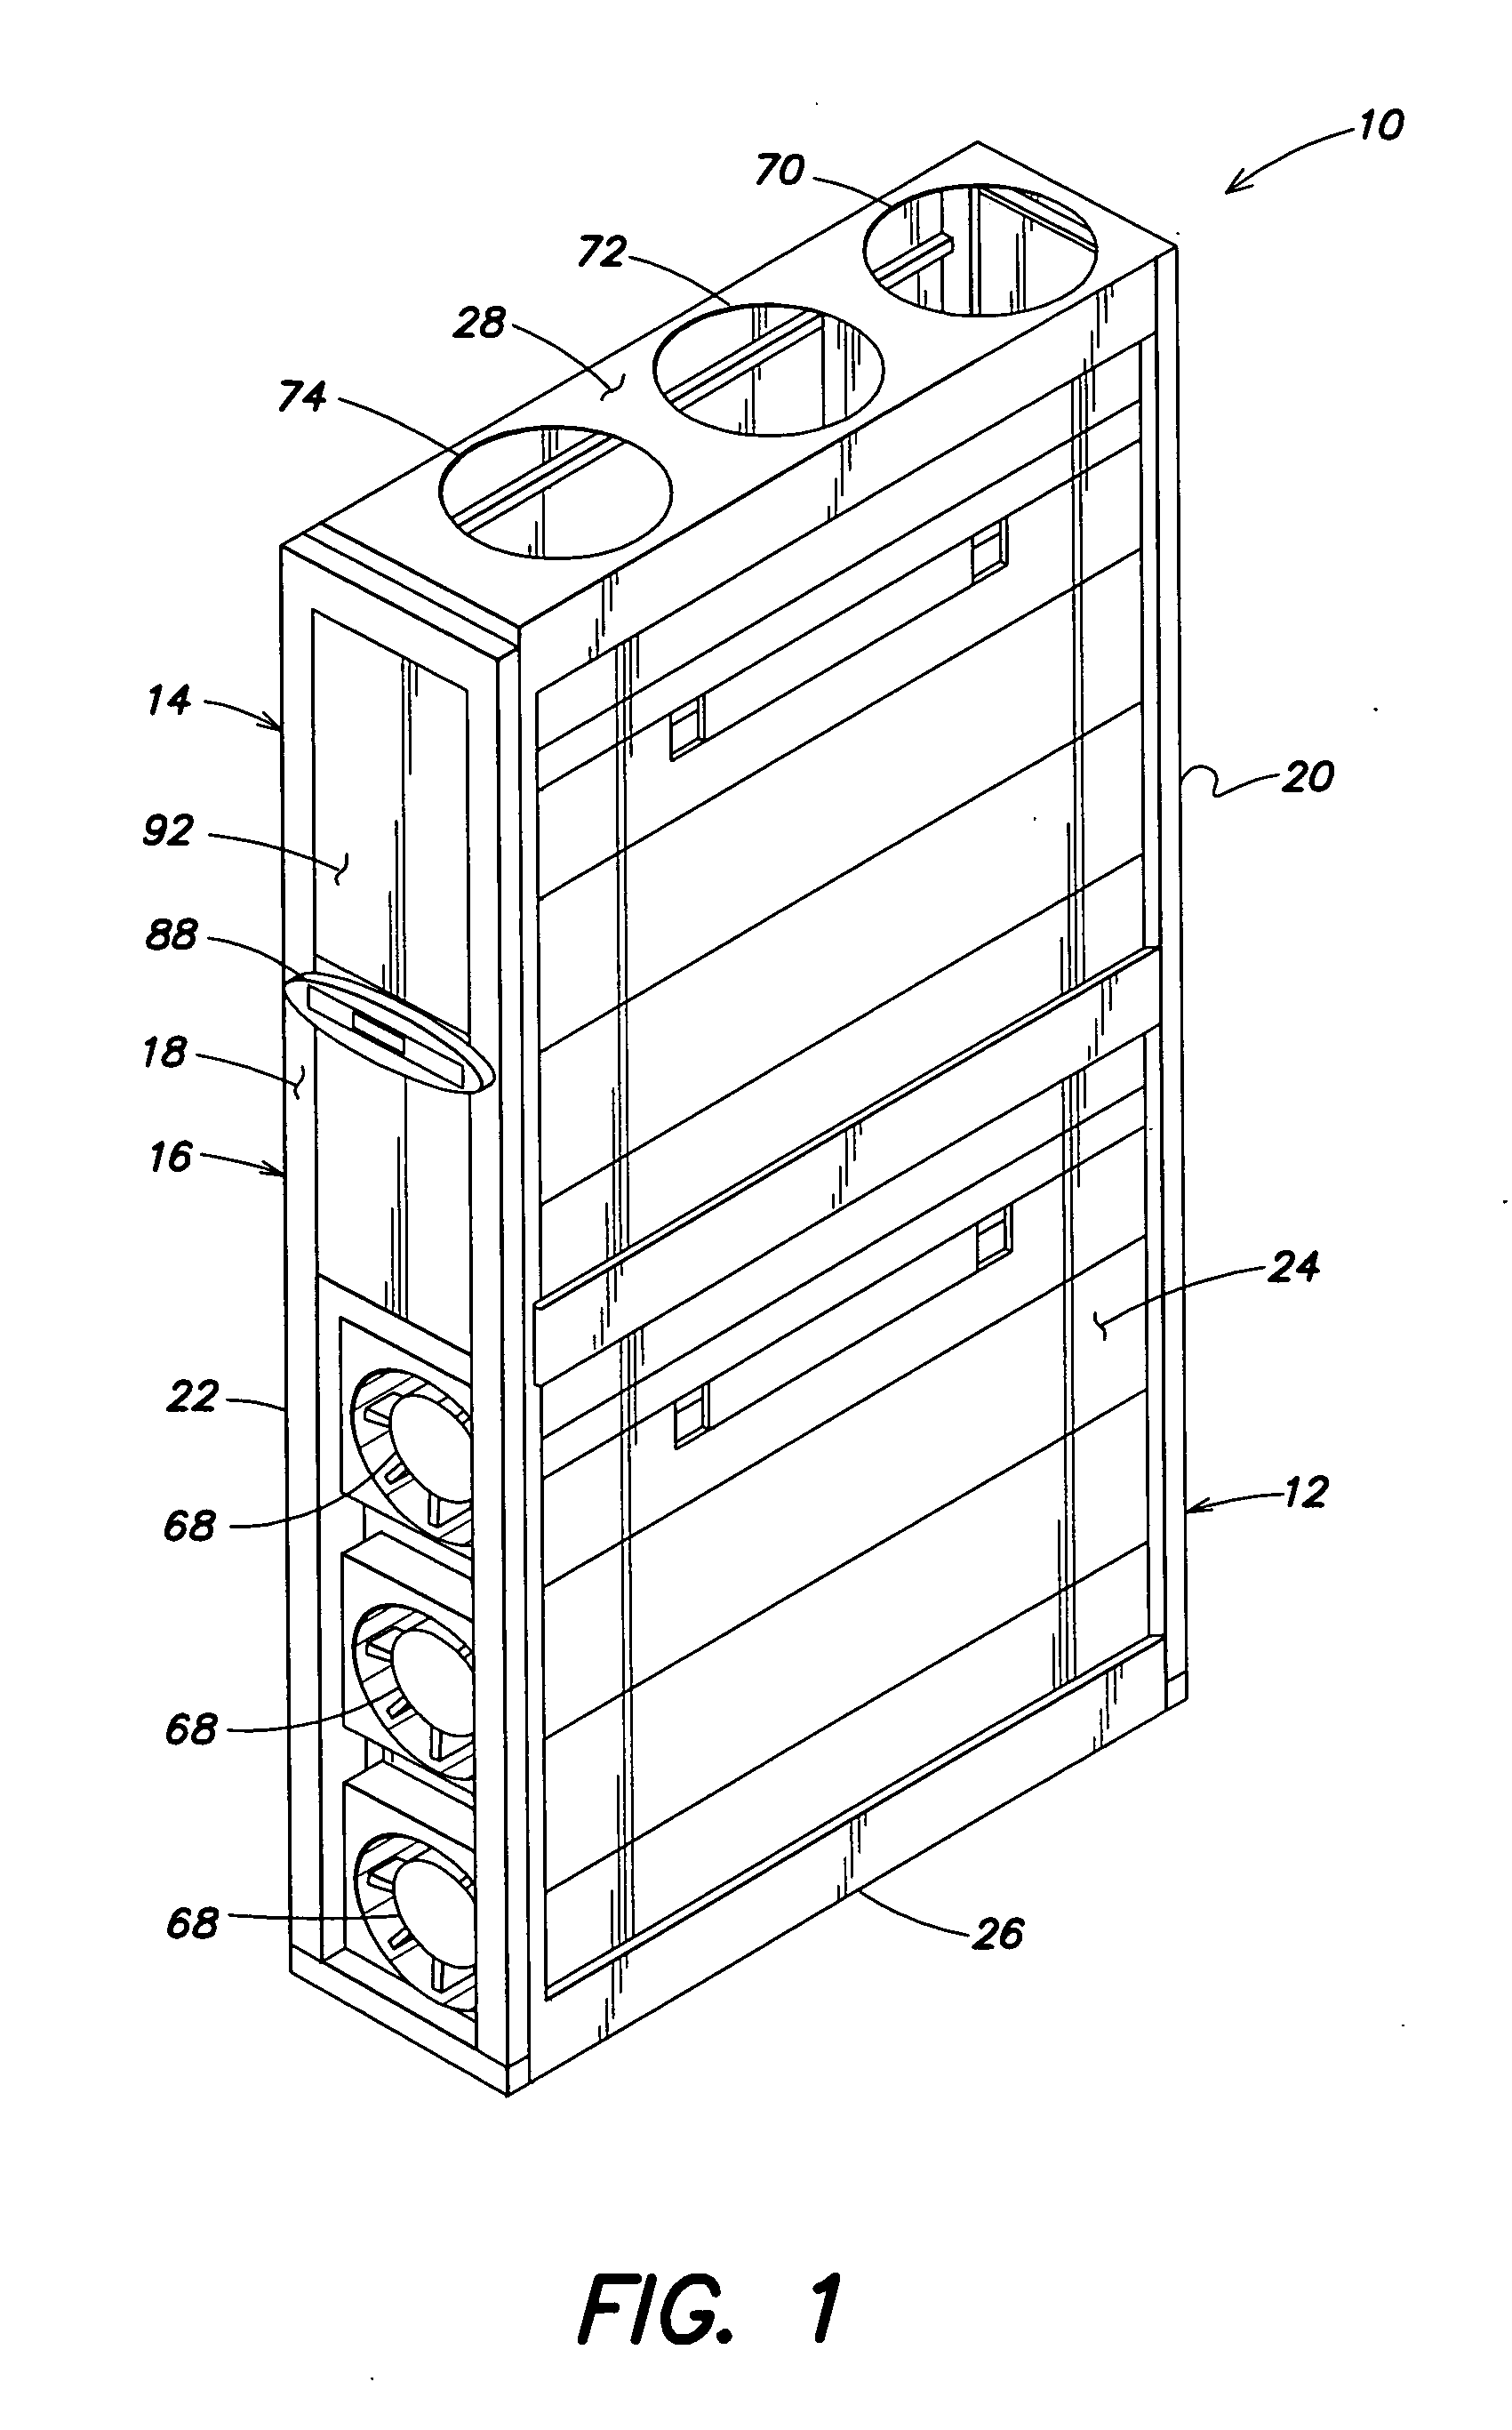 Method and apparatus for cooling